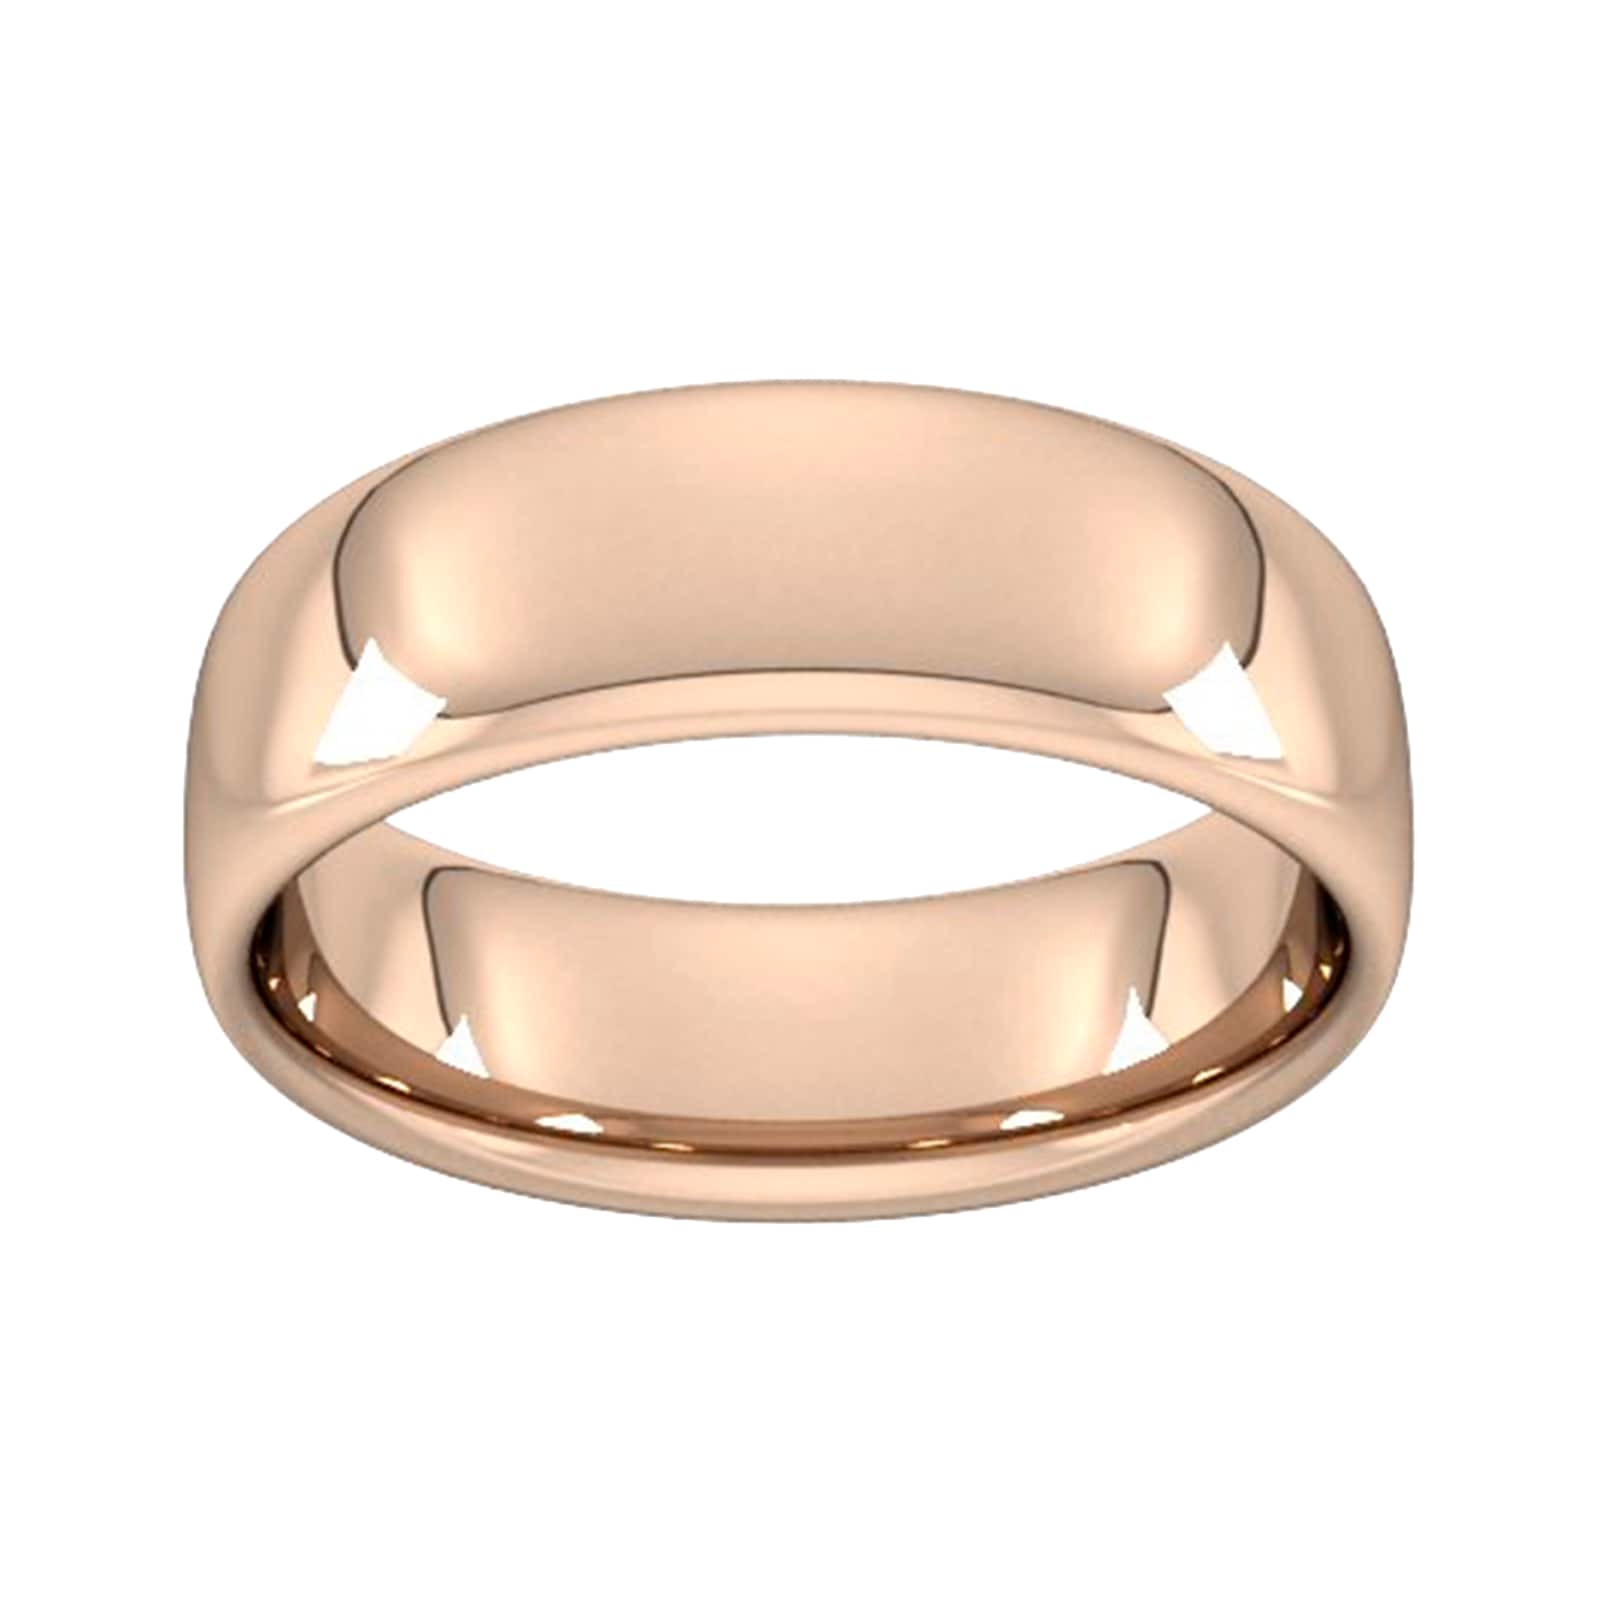 7mm Slight Court Heavy Wedding Ring In 9 Carat Rose Gold - Ring Size R